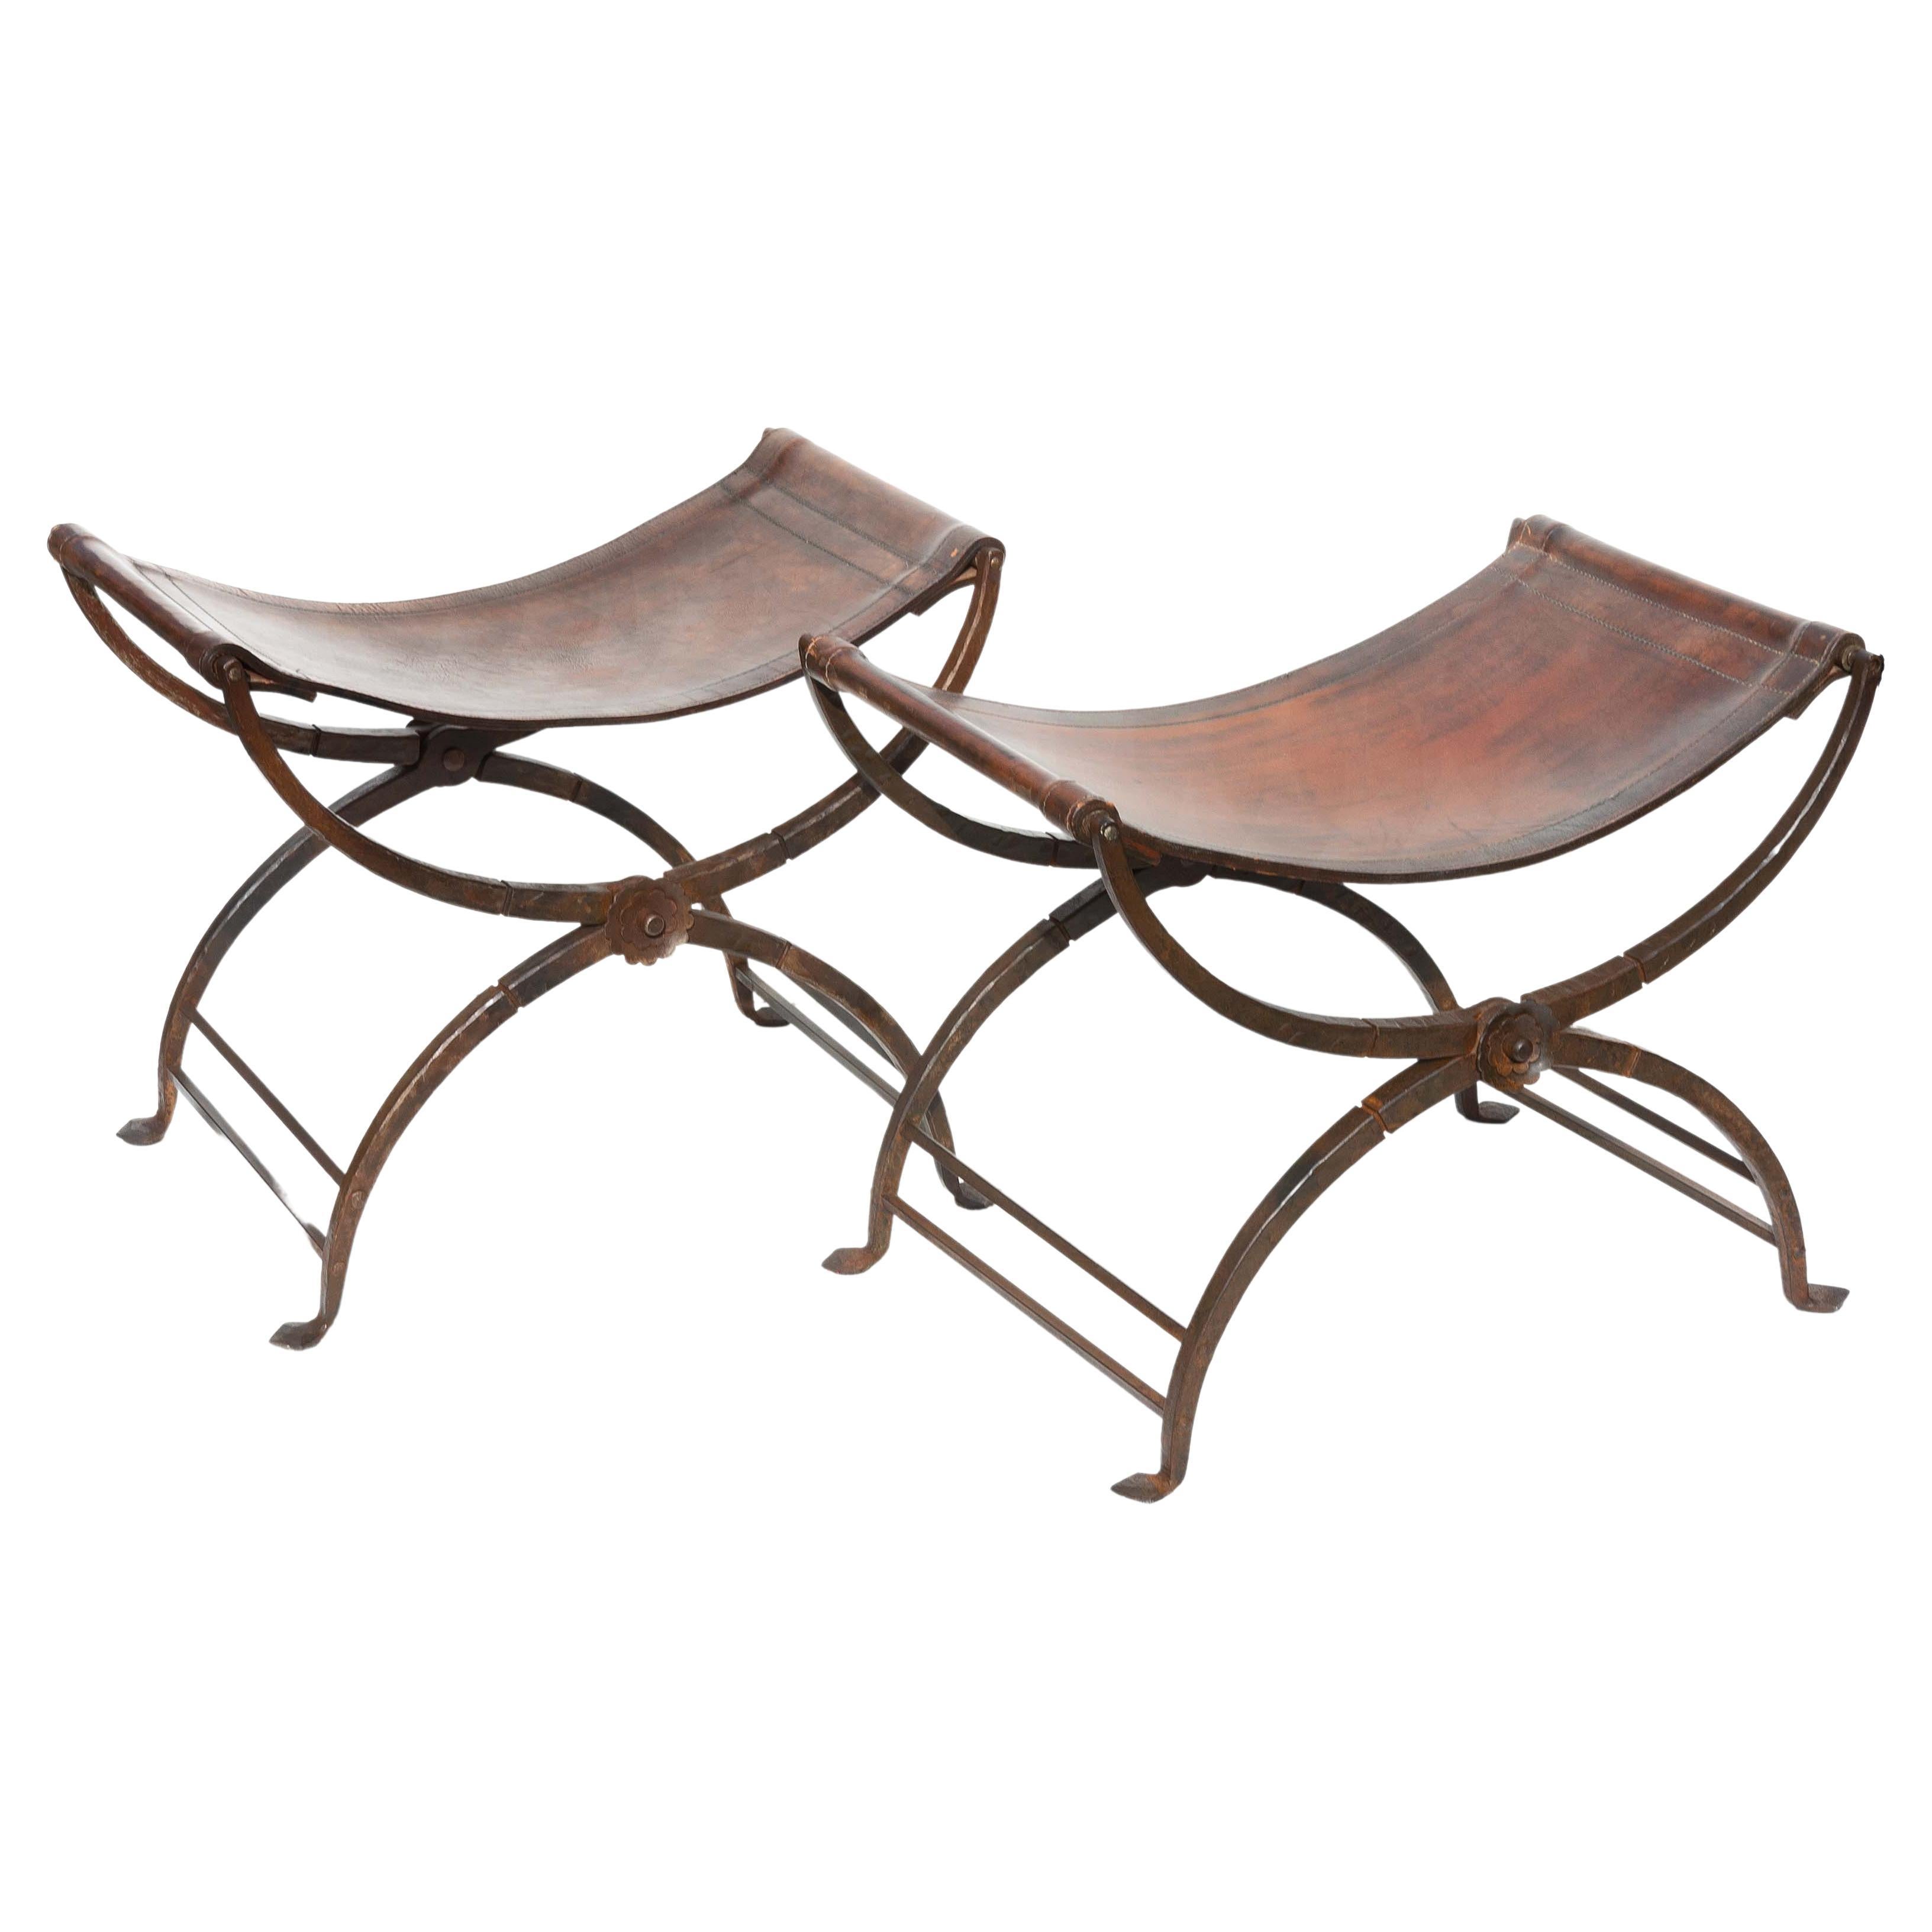 Pair 19th century Italian curule folding stools. Hand wrought iron folding base. Double stitched fine Italian leather seats. Exceptional quality.
























Renaissance.
 